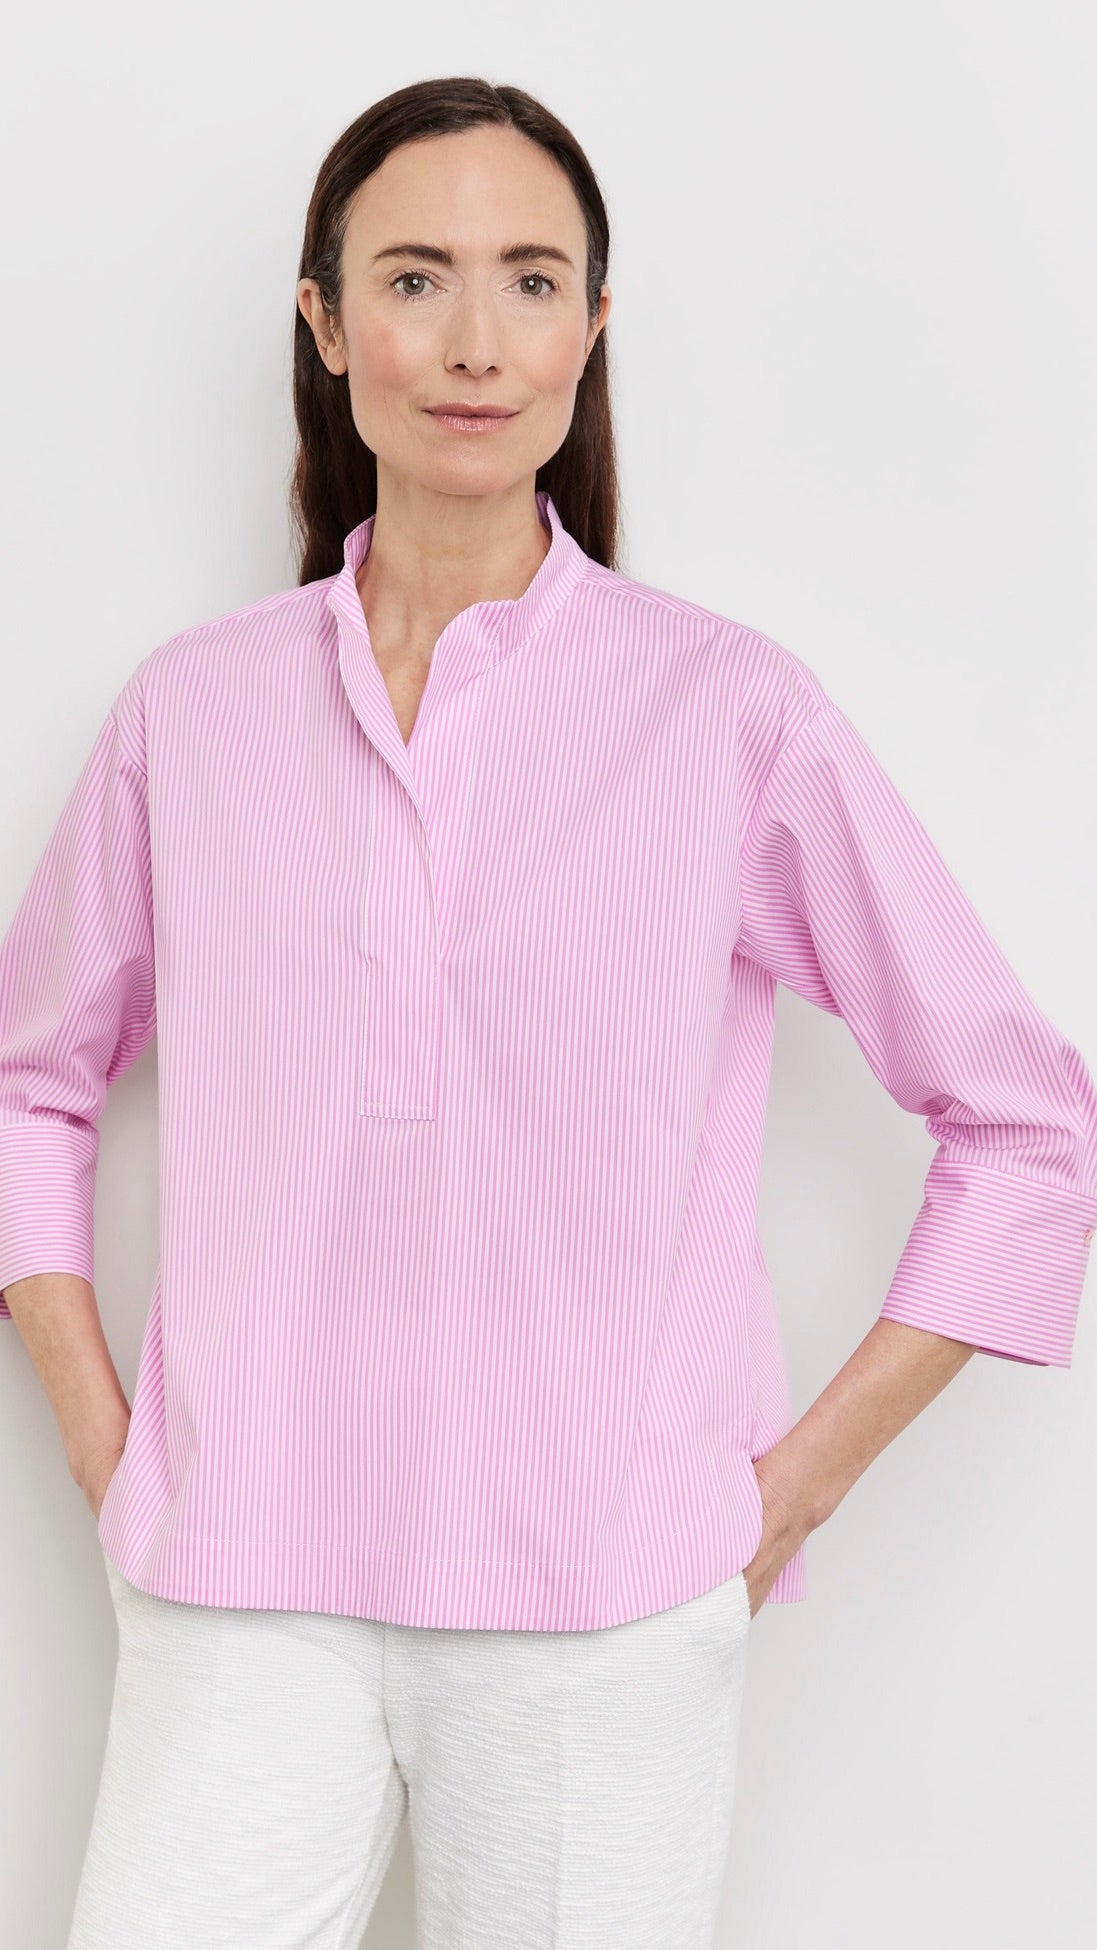 BLOUSE AMPLE RAYÉE 965049 66421 GERRY WEBER ROSE#color_3096/rose